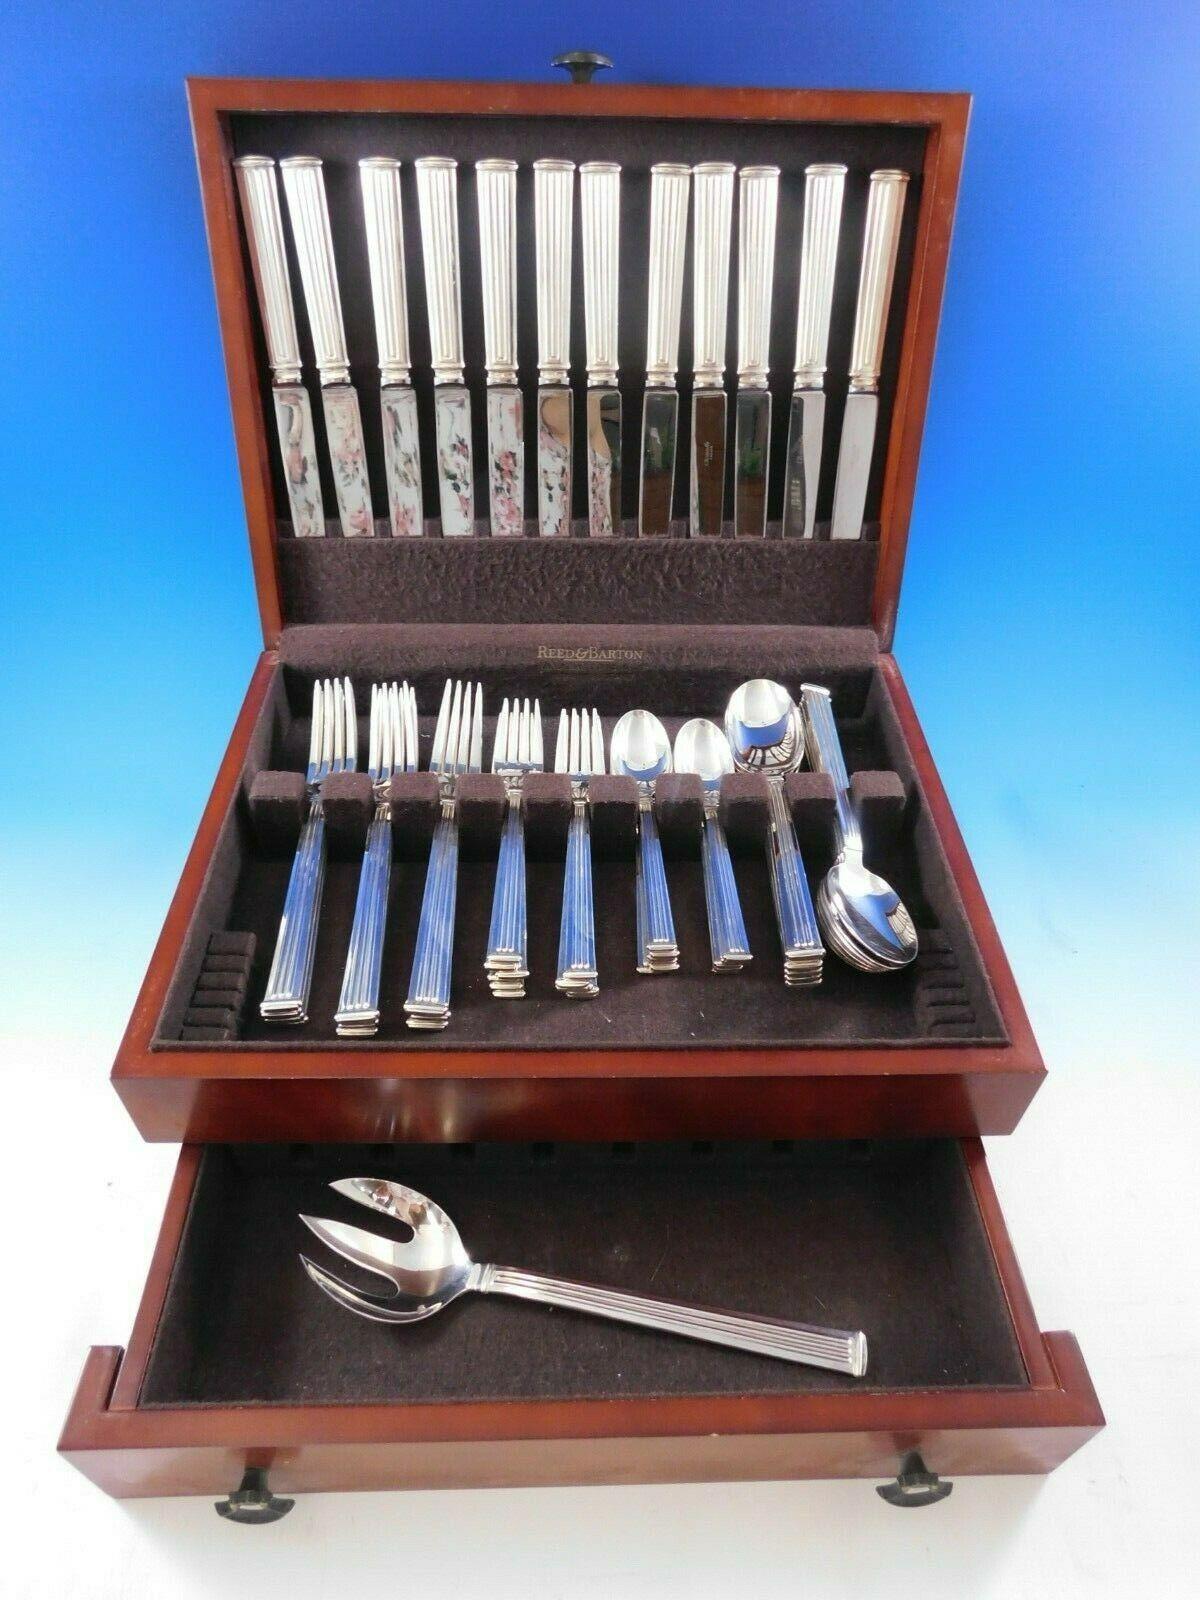 Modern clean lines in a Classic column motif makes this pattern, Triade, forever timeless. 

Dinner Size Triade by Christofle France Silverplated Flatware set - 61 pieces. This set includes:

12 dinner knives, 9 3/4